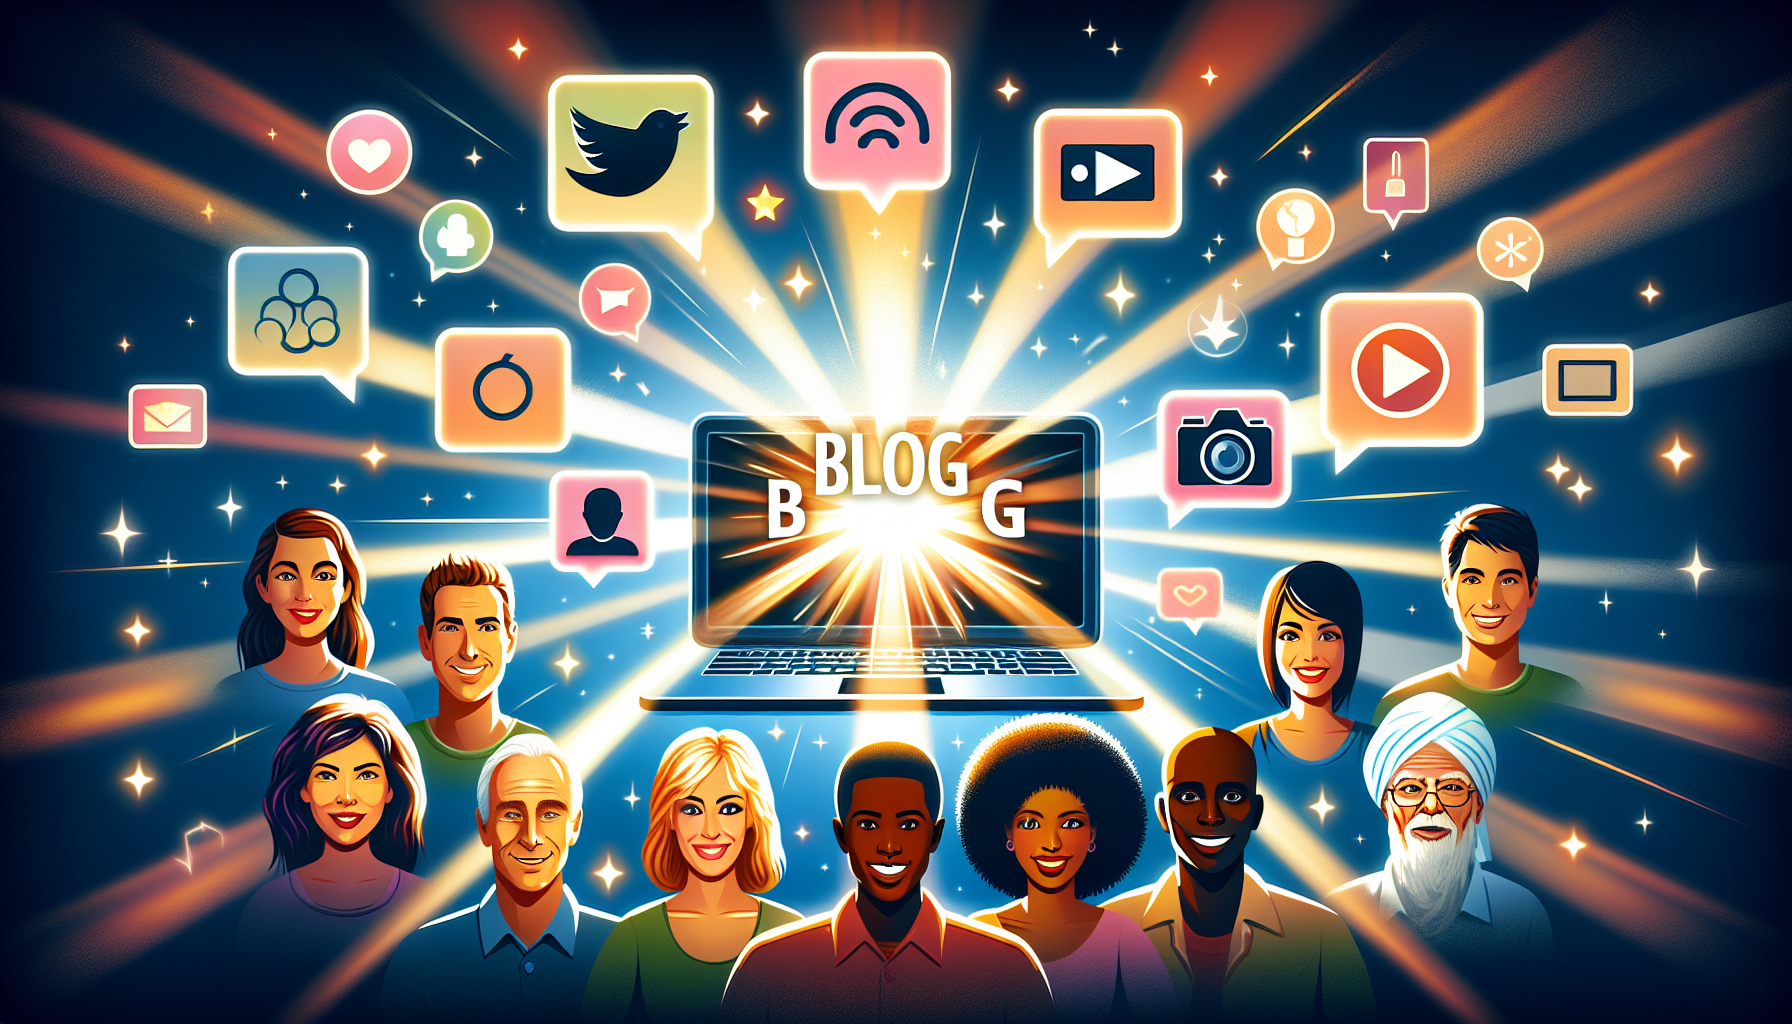 Illustration of the impact of blogging on brand awareness